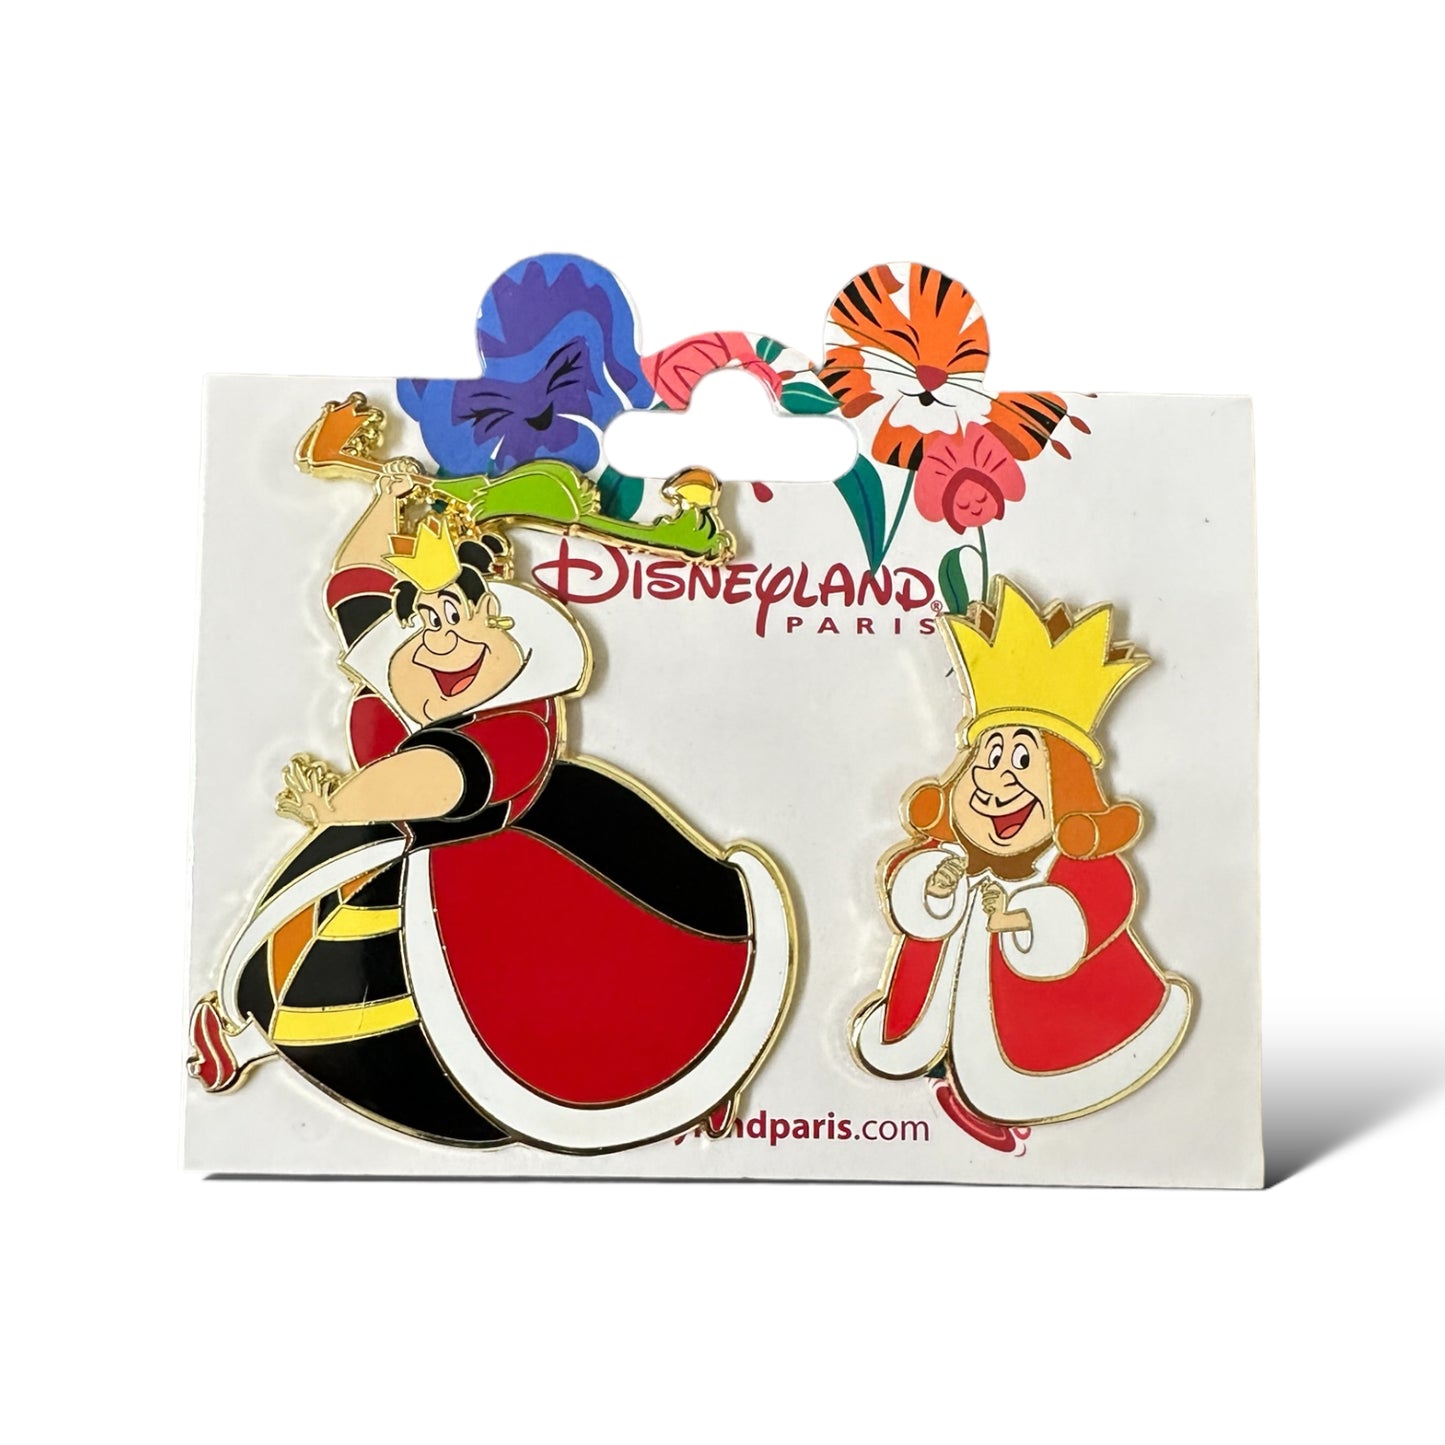 DLRP Alice in Wonderland King and Queen of Hearts 2 Pin Set